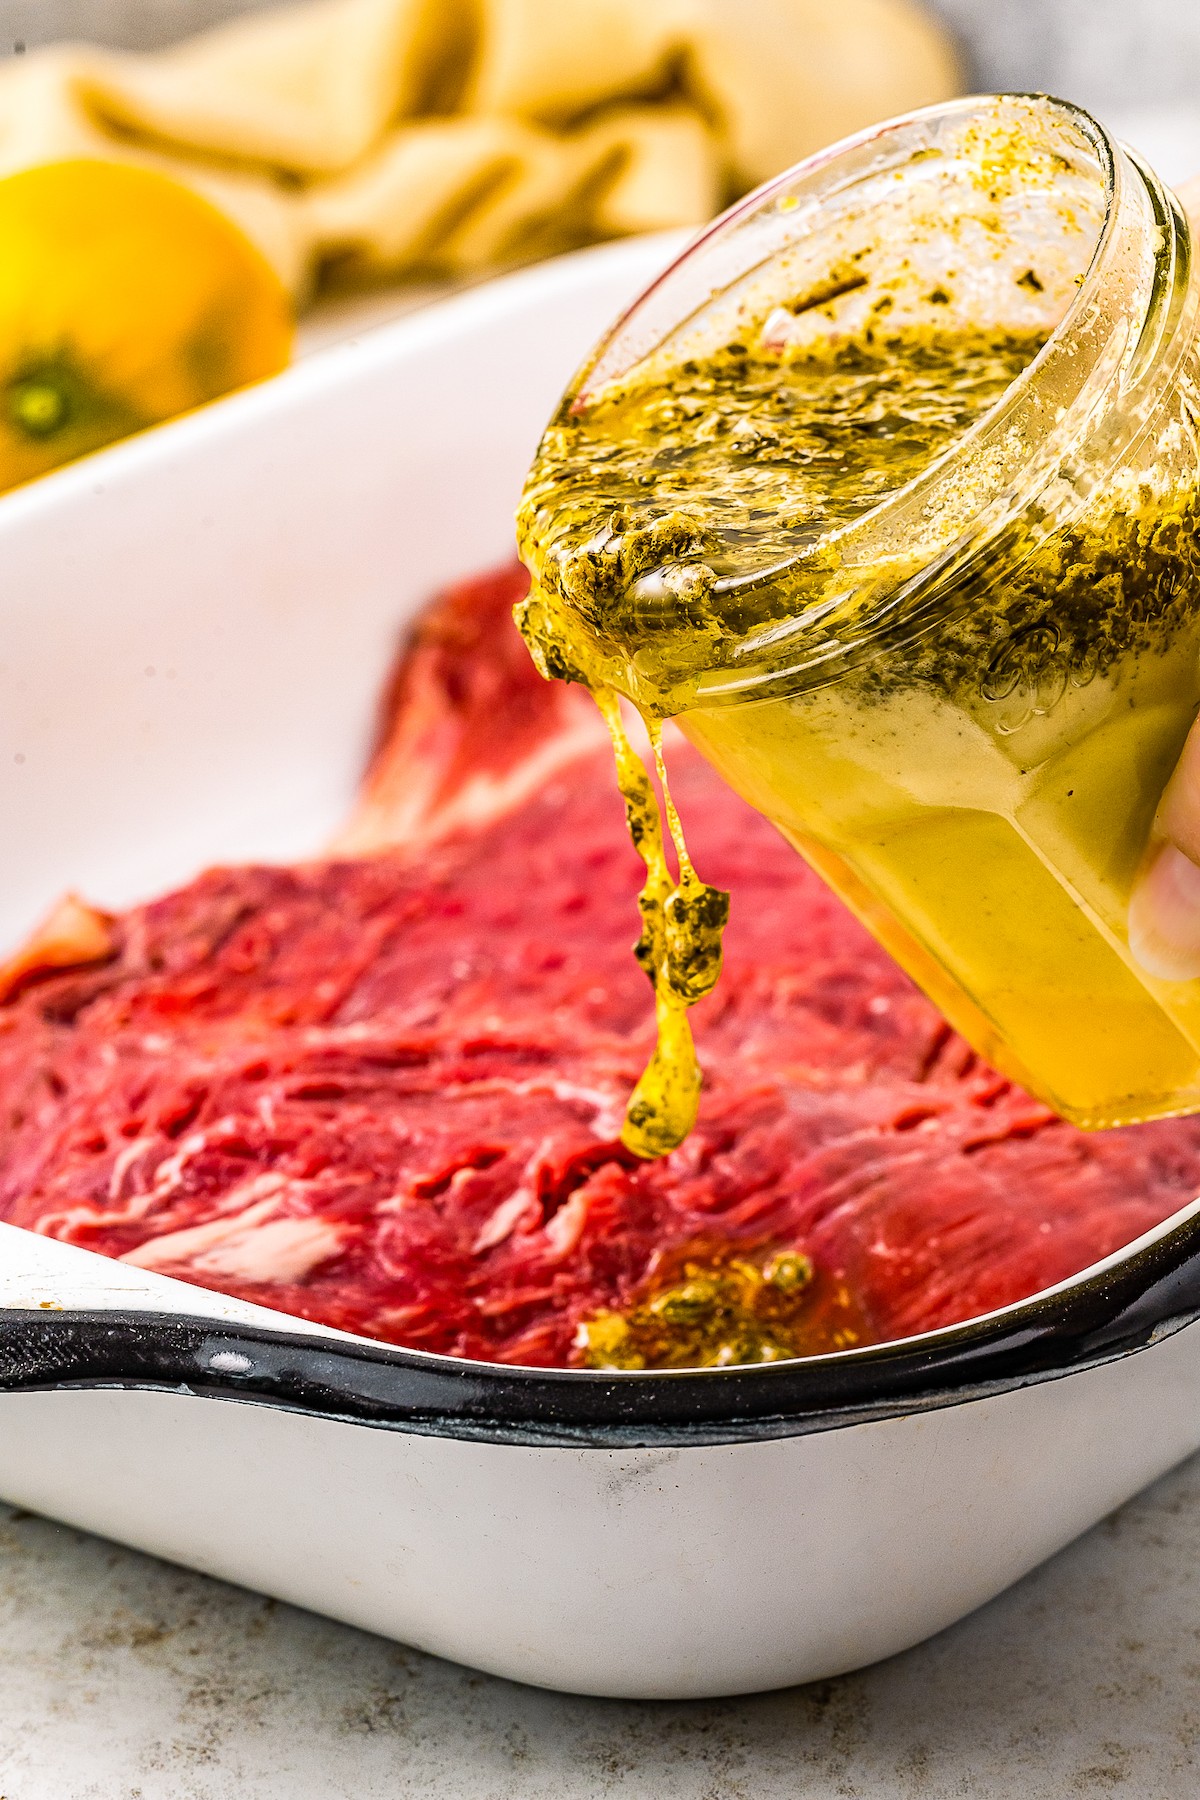 Pouring marinade over steak.